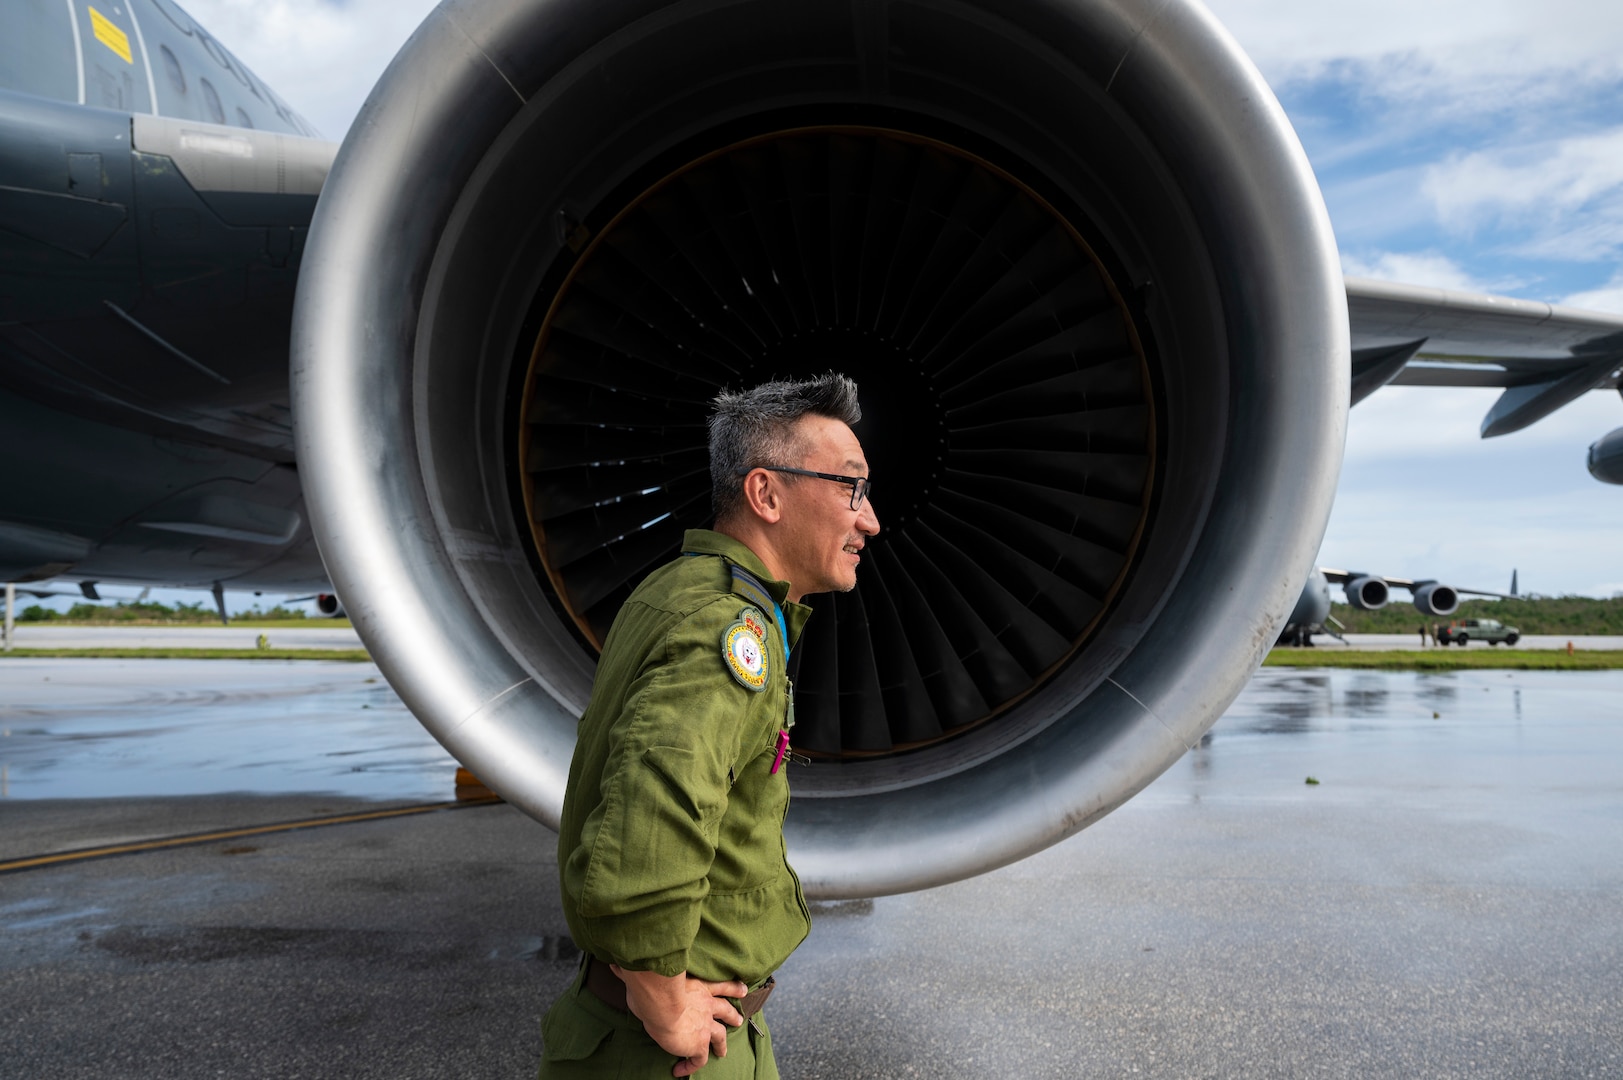 Royal Canadian Air Force Maj. Do Kim, a pilot assigned to 437 Squadron, from 8 Wing Trenton in Trenton, Ontario, conducts preflight checks on a CC150T Polaris Multi Role Tanker Transport during Mobility Guardian 23 at Andersen Air Force Base, Guam, July 10, 2023. MG23 is a multilateral exercise involving joint foreign partners to showcase coalition ability in the INDOPACOM area of responsibility. (U.S. Air Force photo by Tech. Sgt. Joseph Pick)